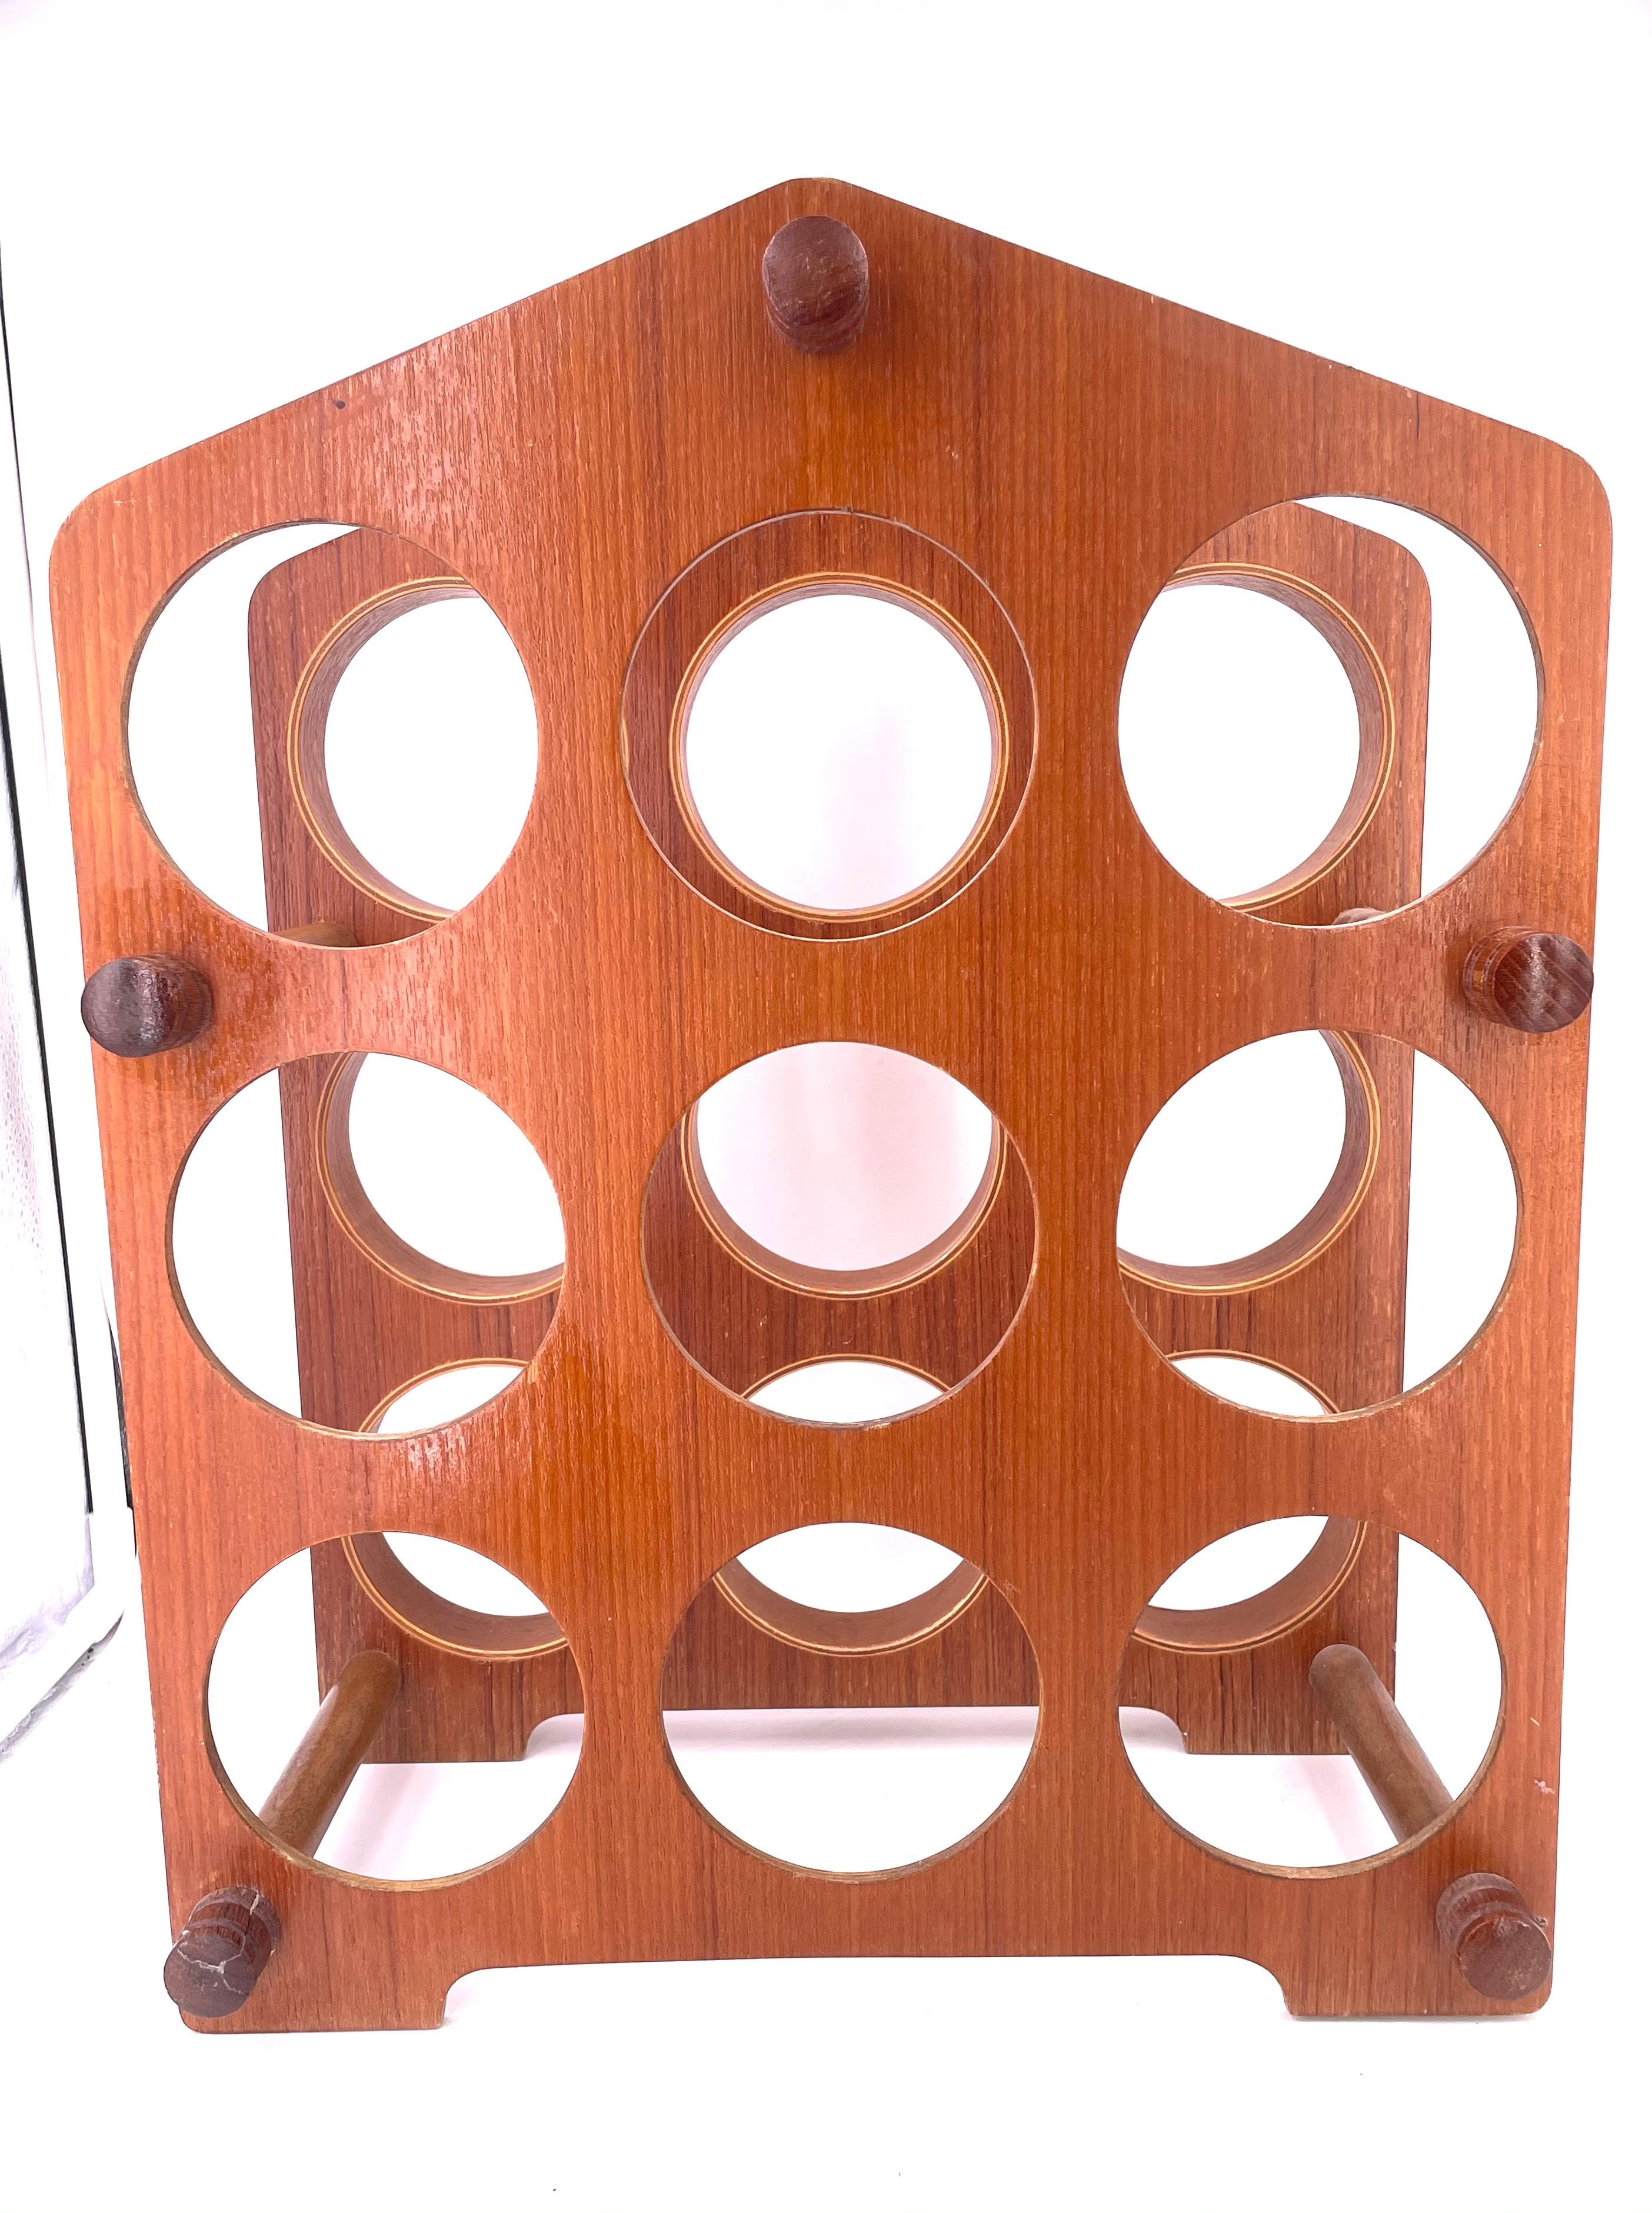 A very cool design and rare vintage molded teak, 9 bottle capacity wine rack, retains old made in Japan label.